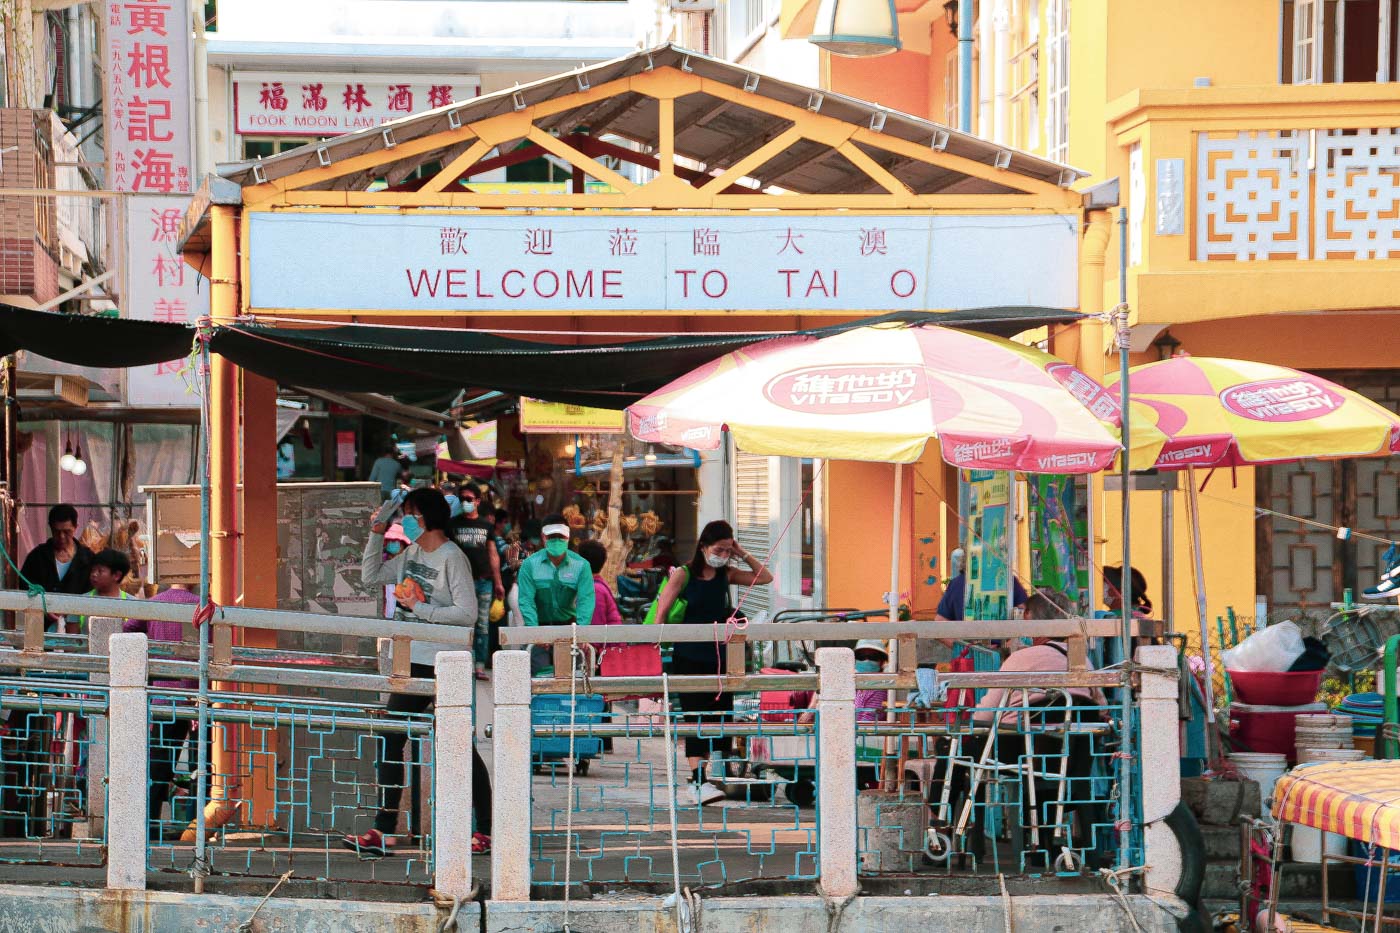 LOCAL TOURISTS. Tai O fishing village on Lantau Island, as seen here on April 17, has seen an increase in local tourists lately. Photo by Tommy Walker/Rappler  